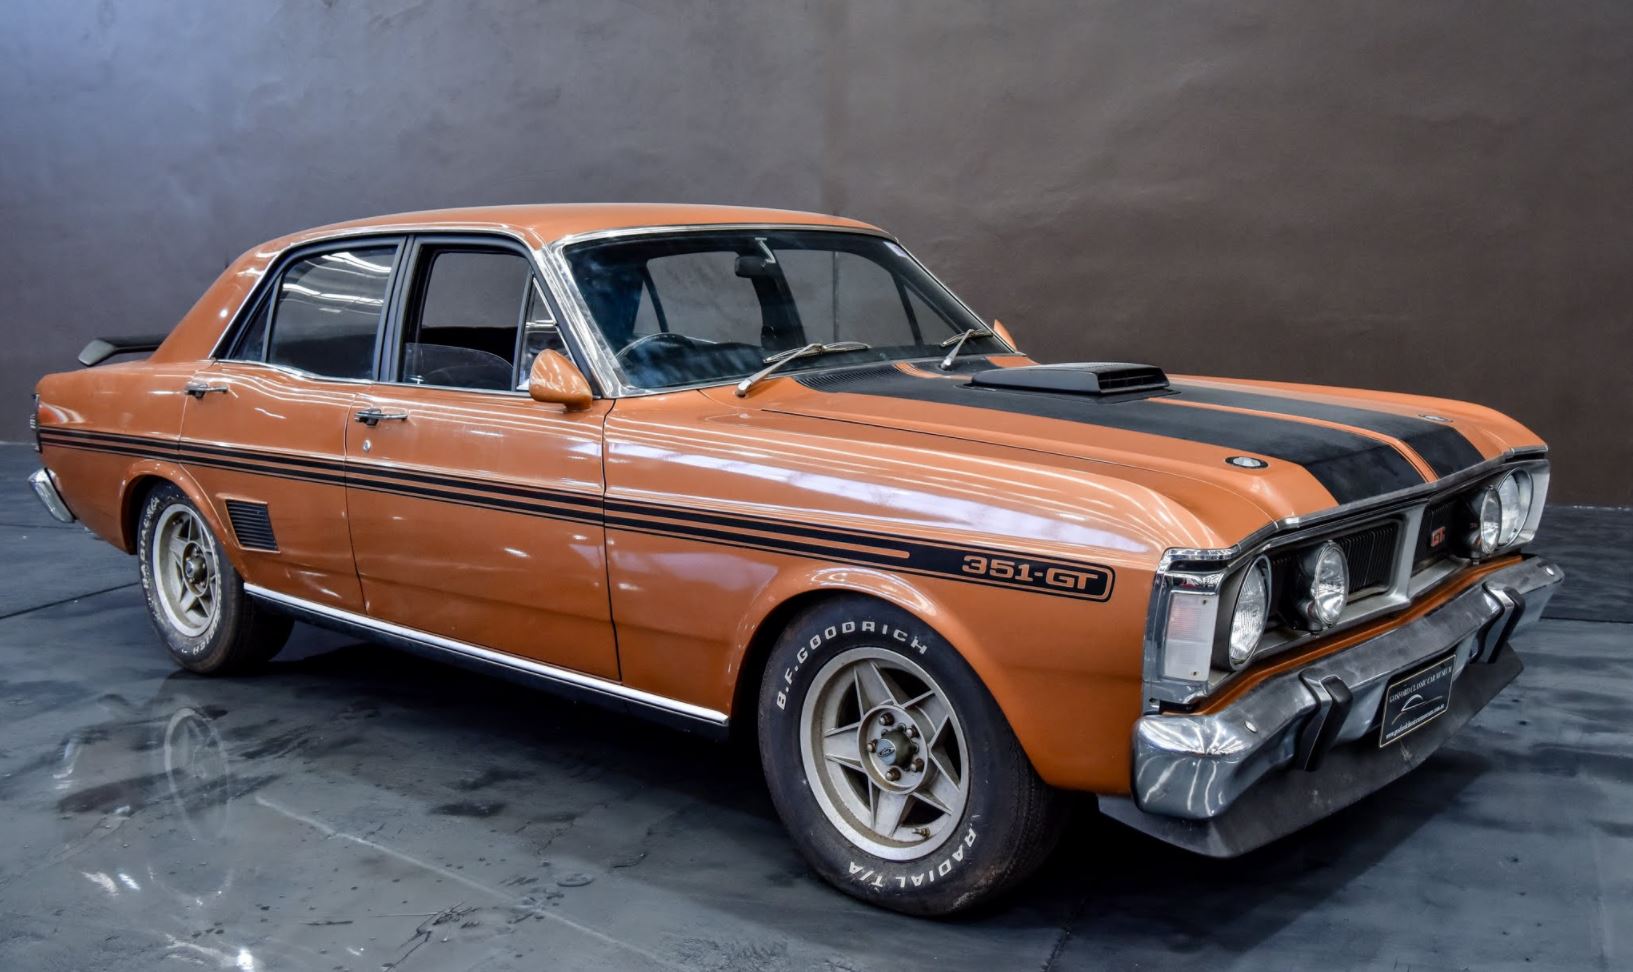 1971 Ford Falcon GTHO Phase III